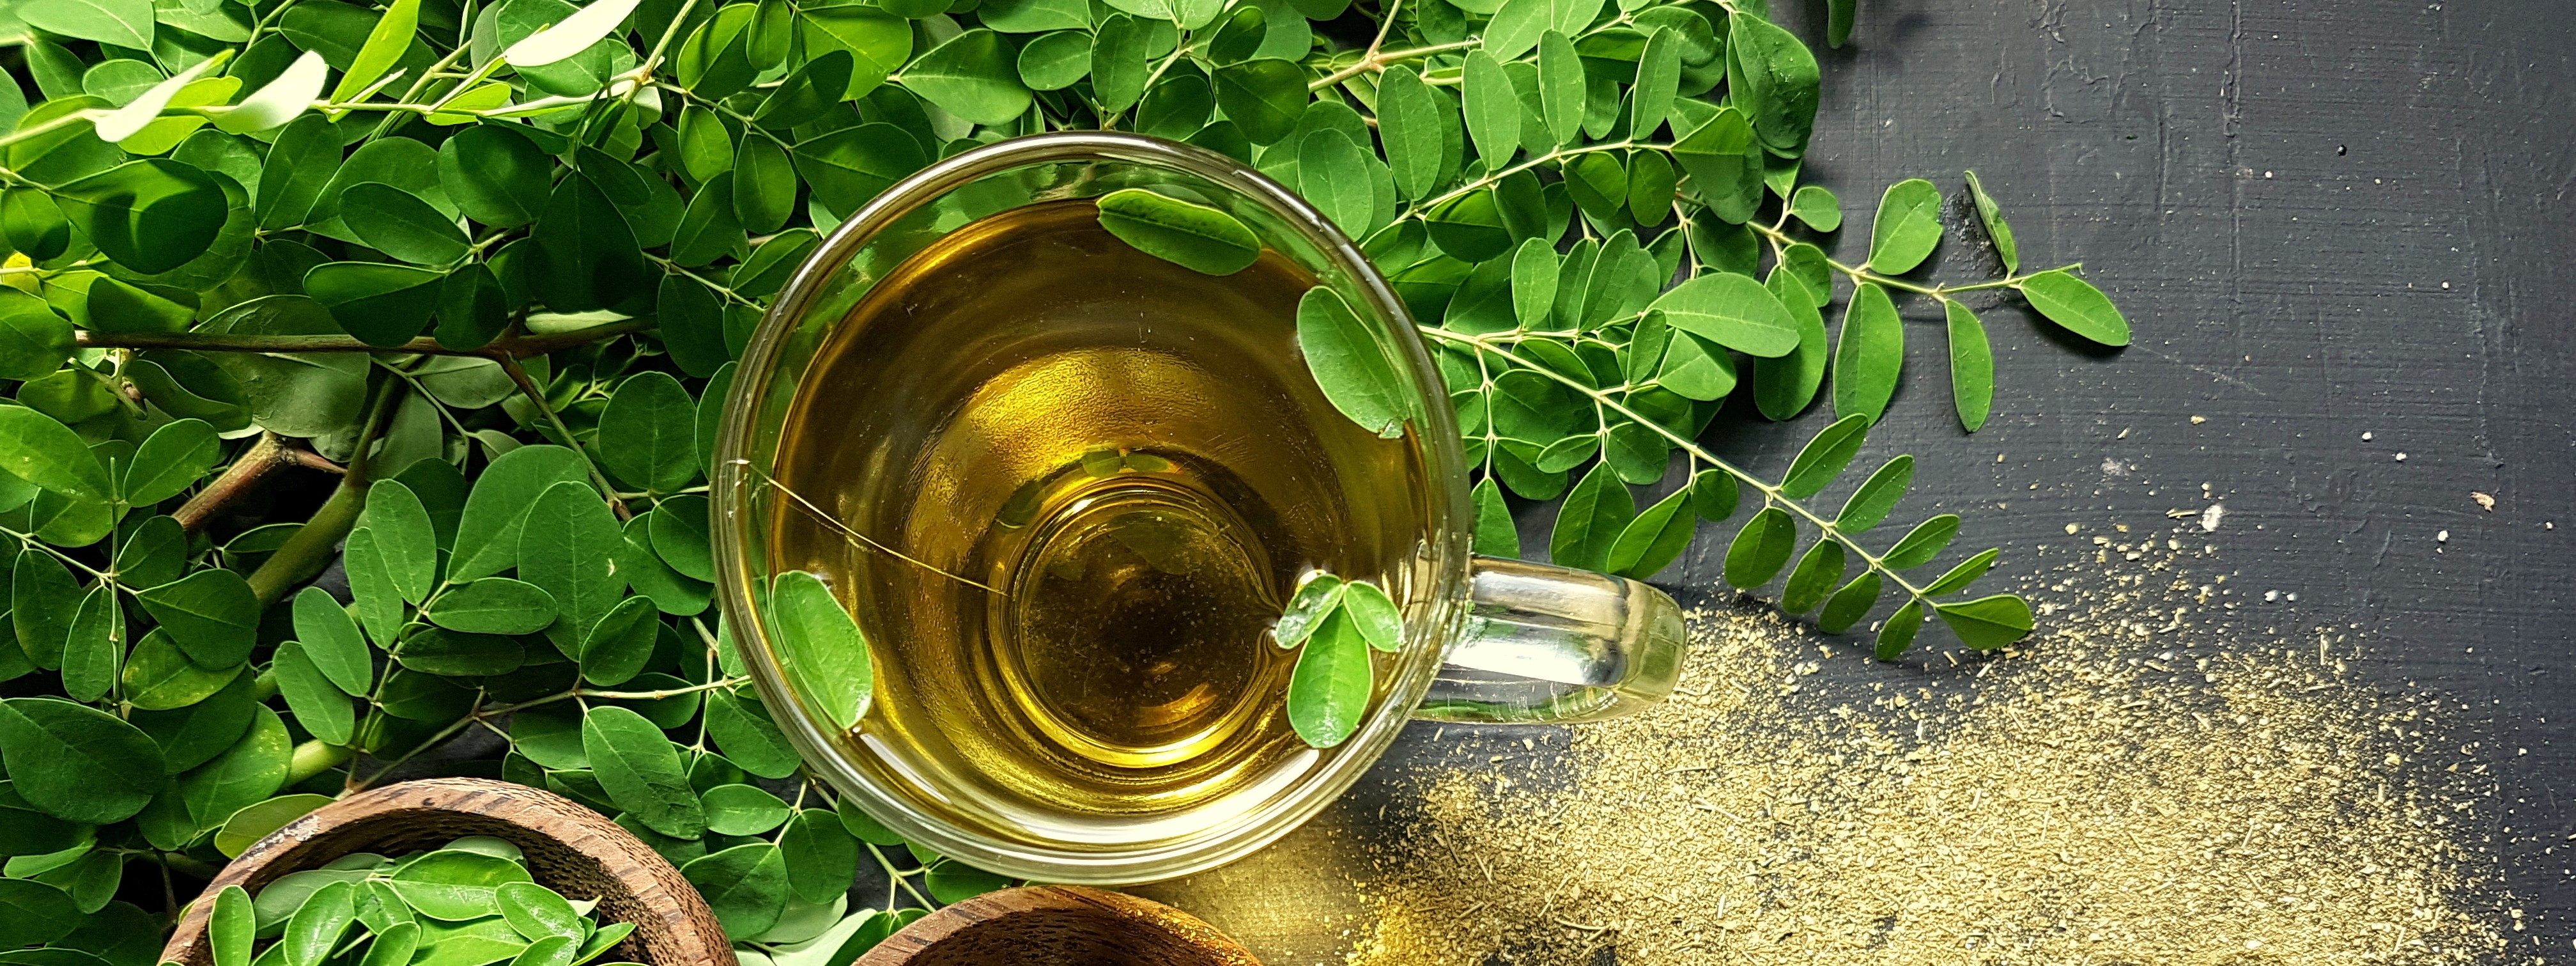 Leaves and oil from the Moringa tree